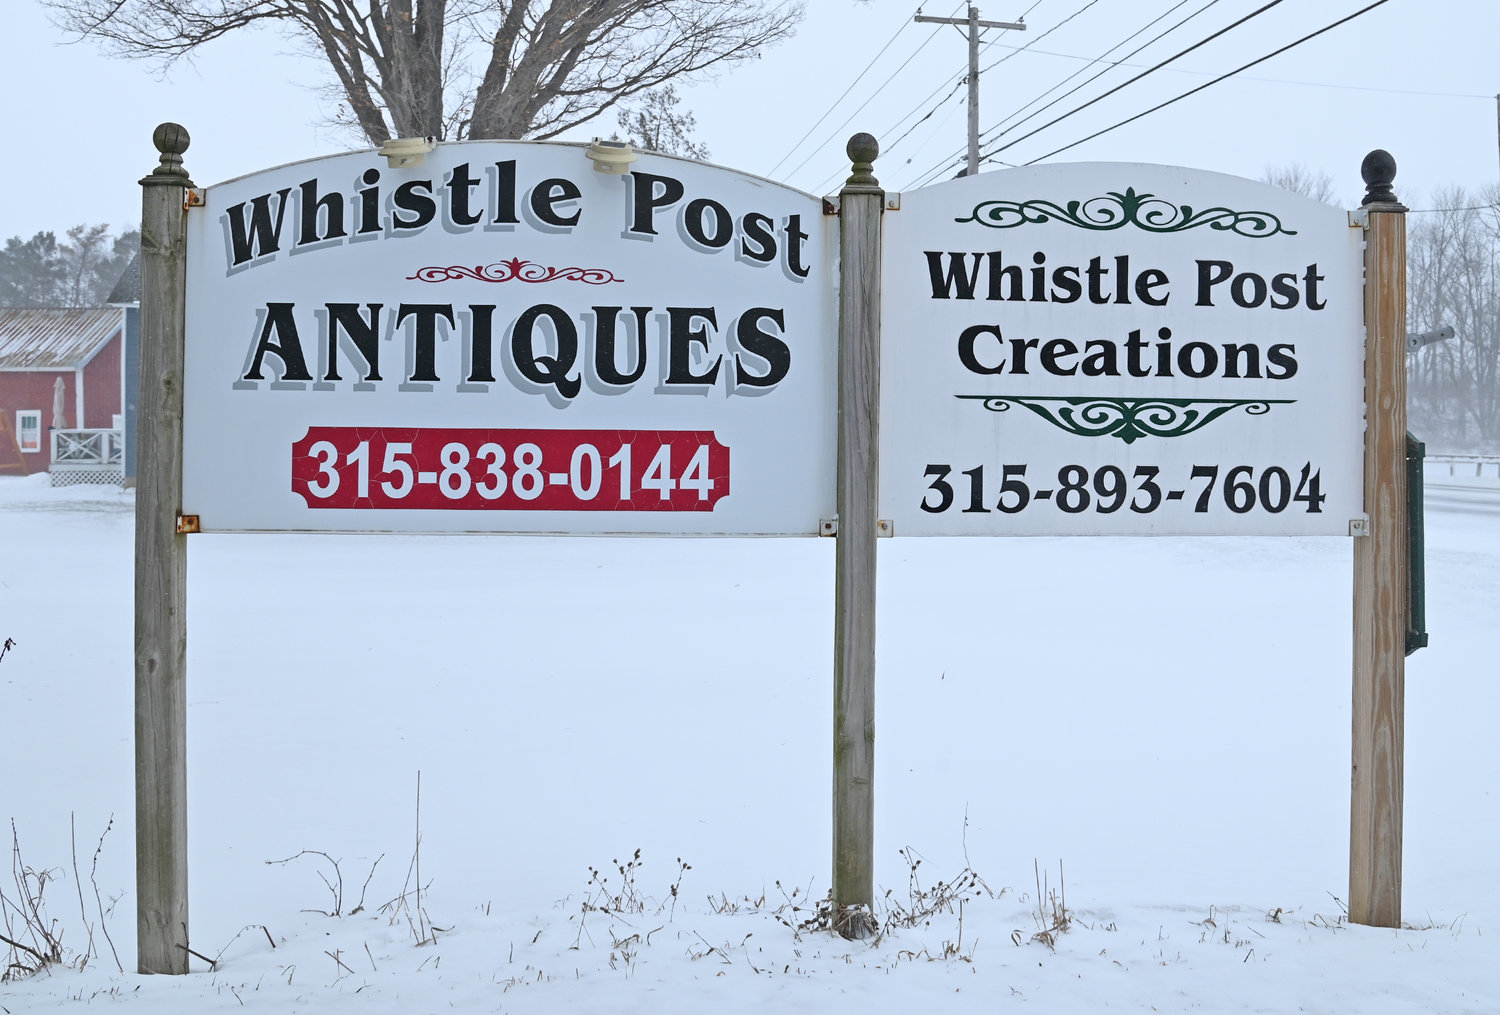 Whistle Post Antiques and Whistle Post Creations signs Friday, Feb. 3 on Route 20 in Bouckville.